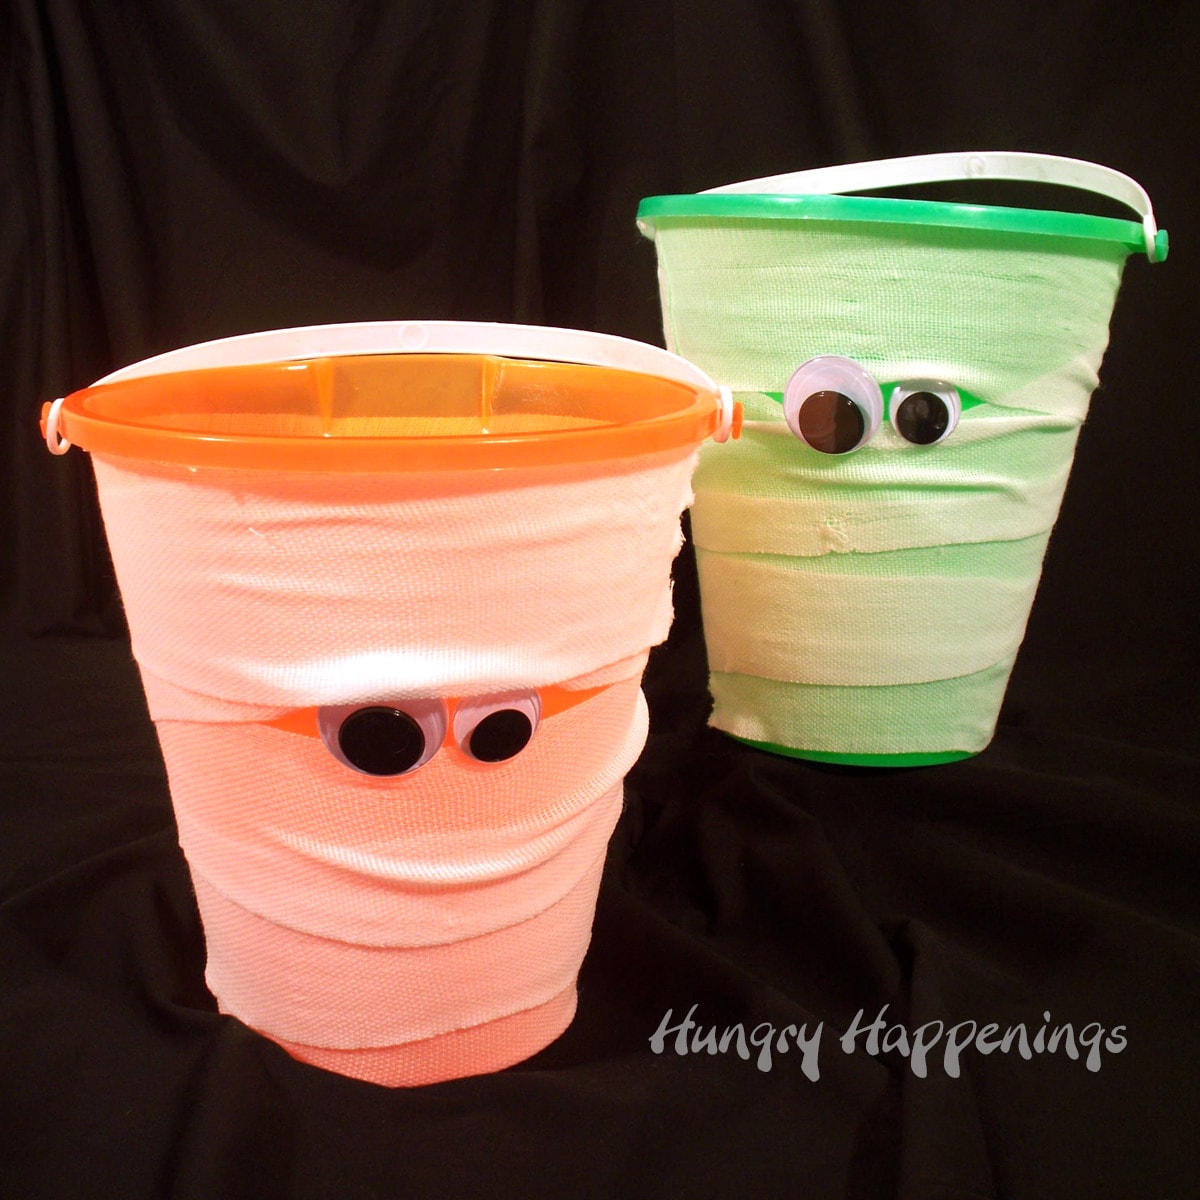 mummy buckets wrapped in gauze with googly eyes.